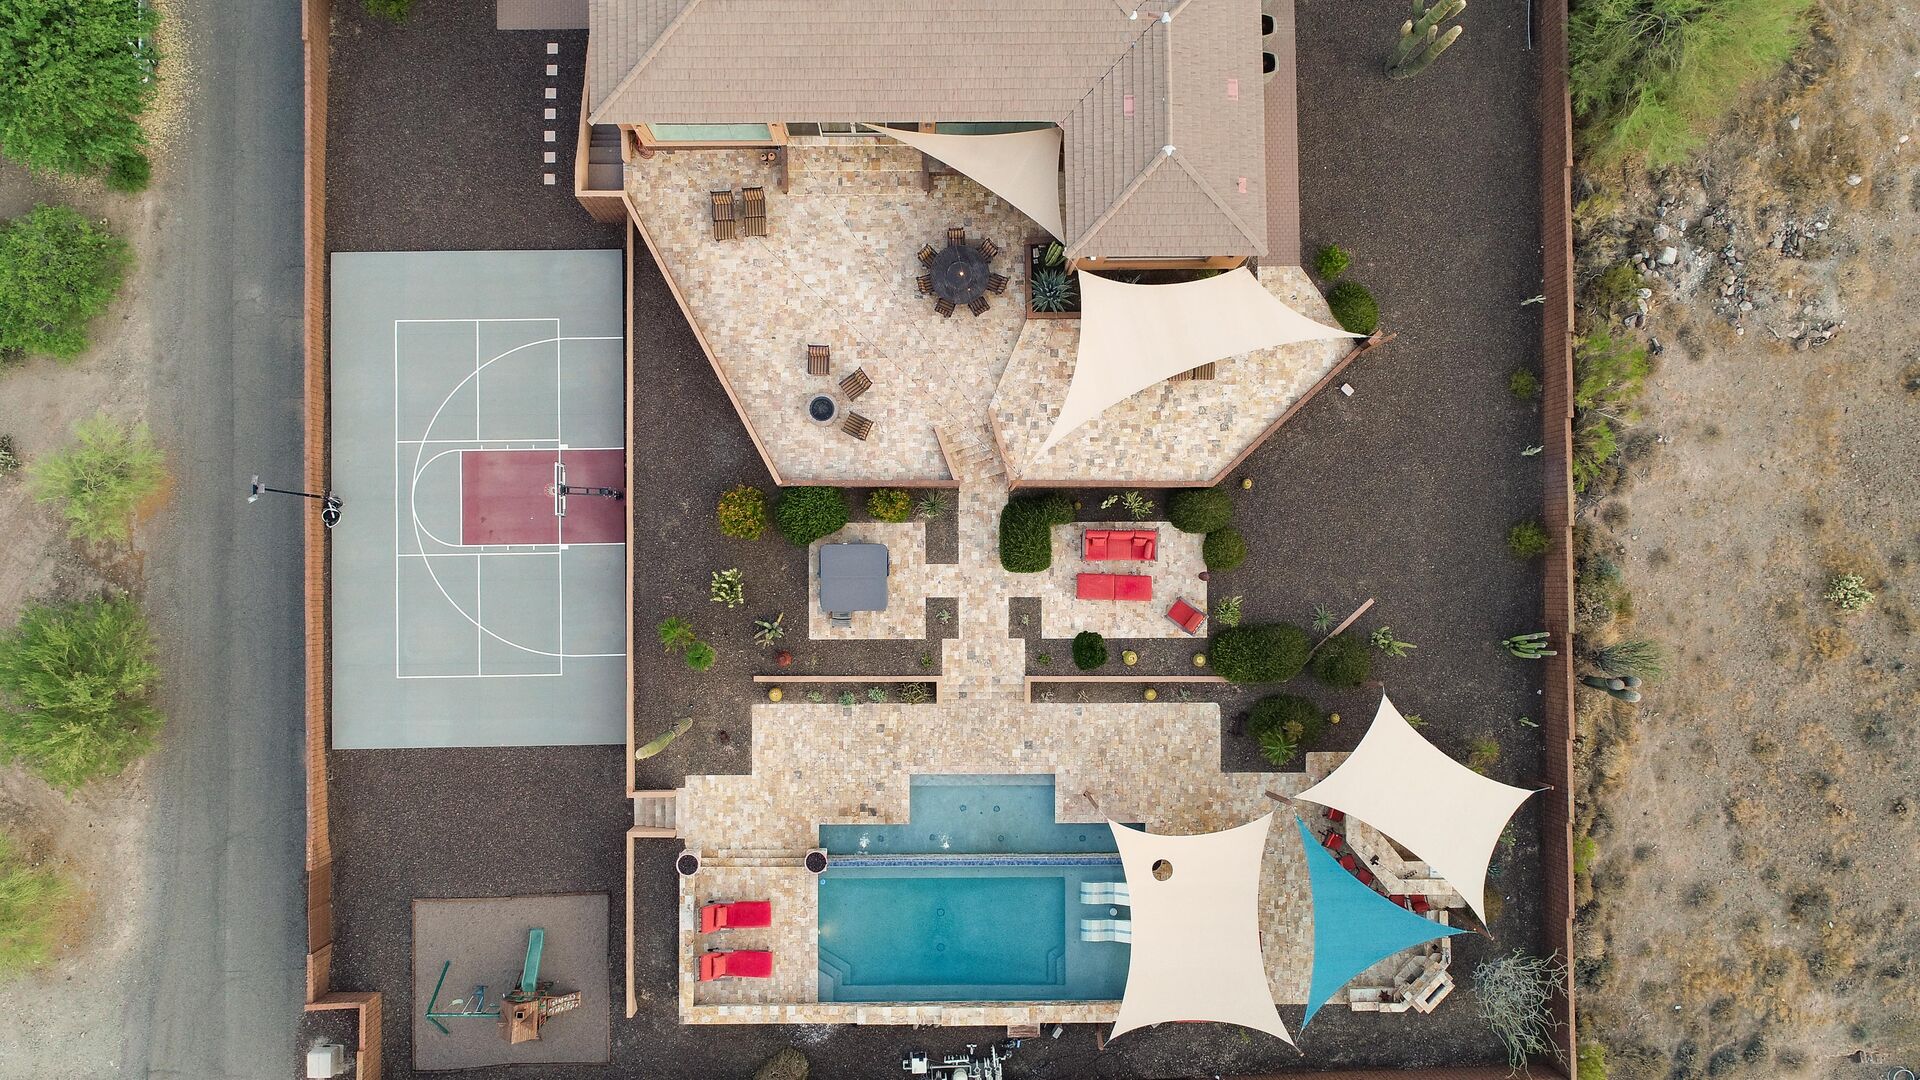 Aerial Photo of Desert Estate - The playground is no longer available